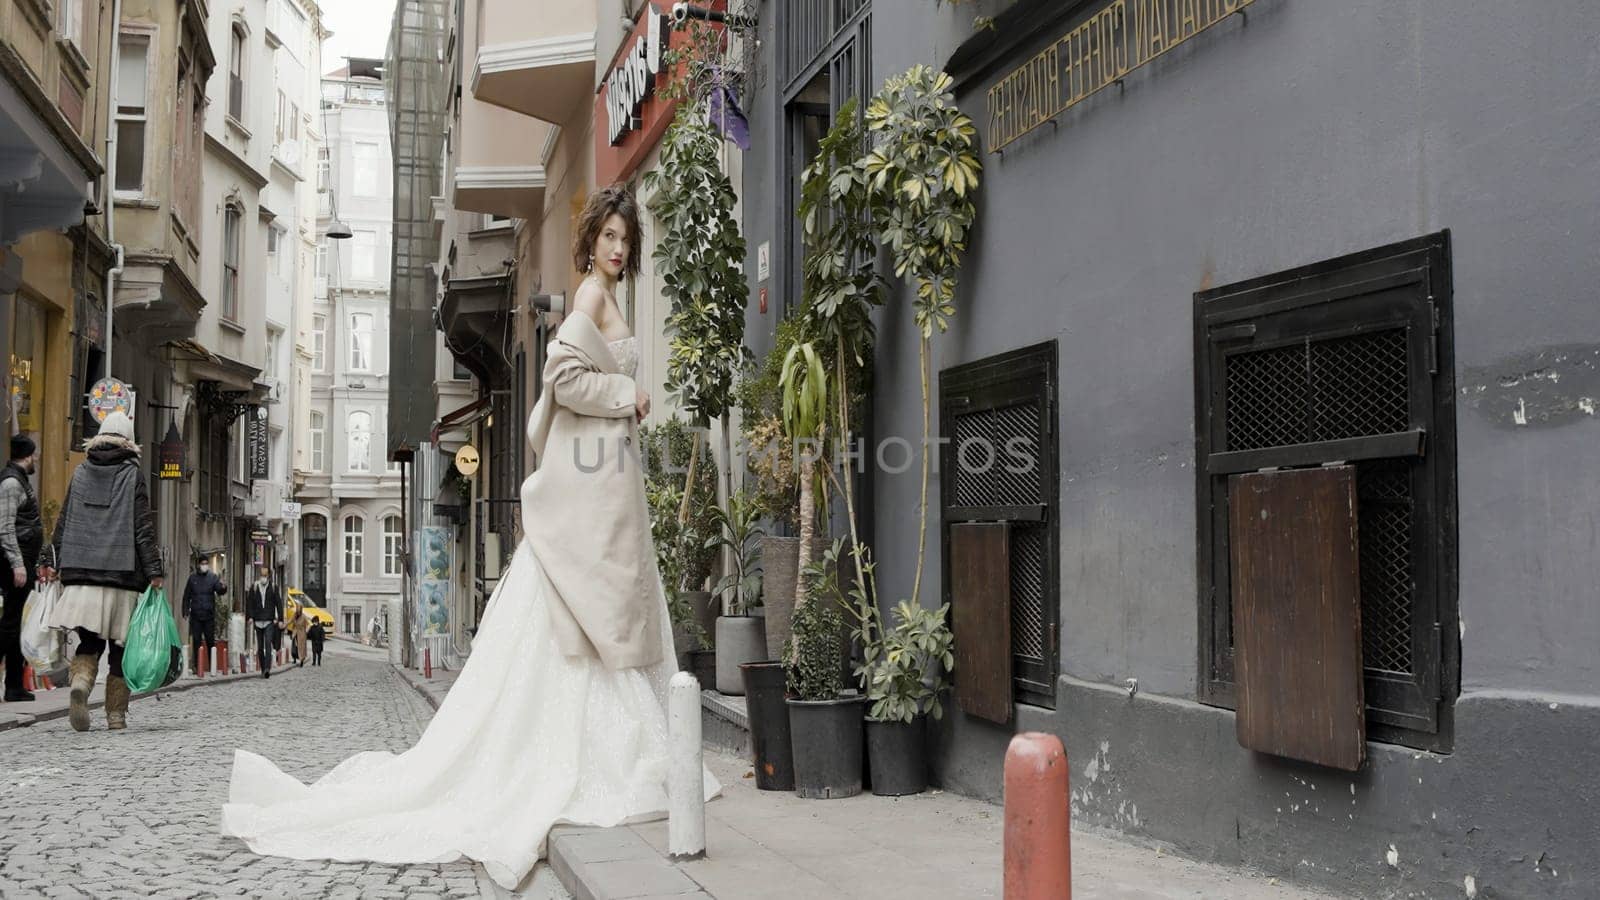 Turkey, Istanbul - July 27, 2022: Young fashionable luxury girl bride in elegant long wedding white dress in the narrow street of the old city. Action. Brunette woman standing during wedding photo shooting